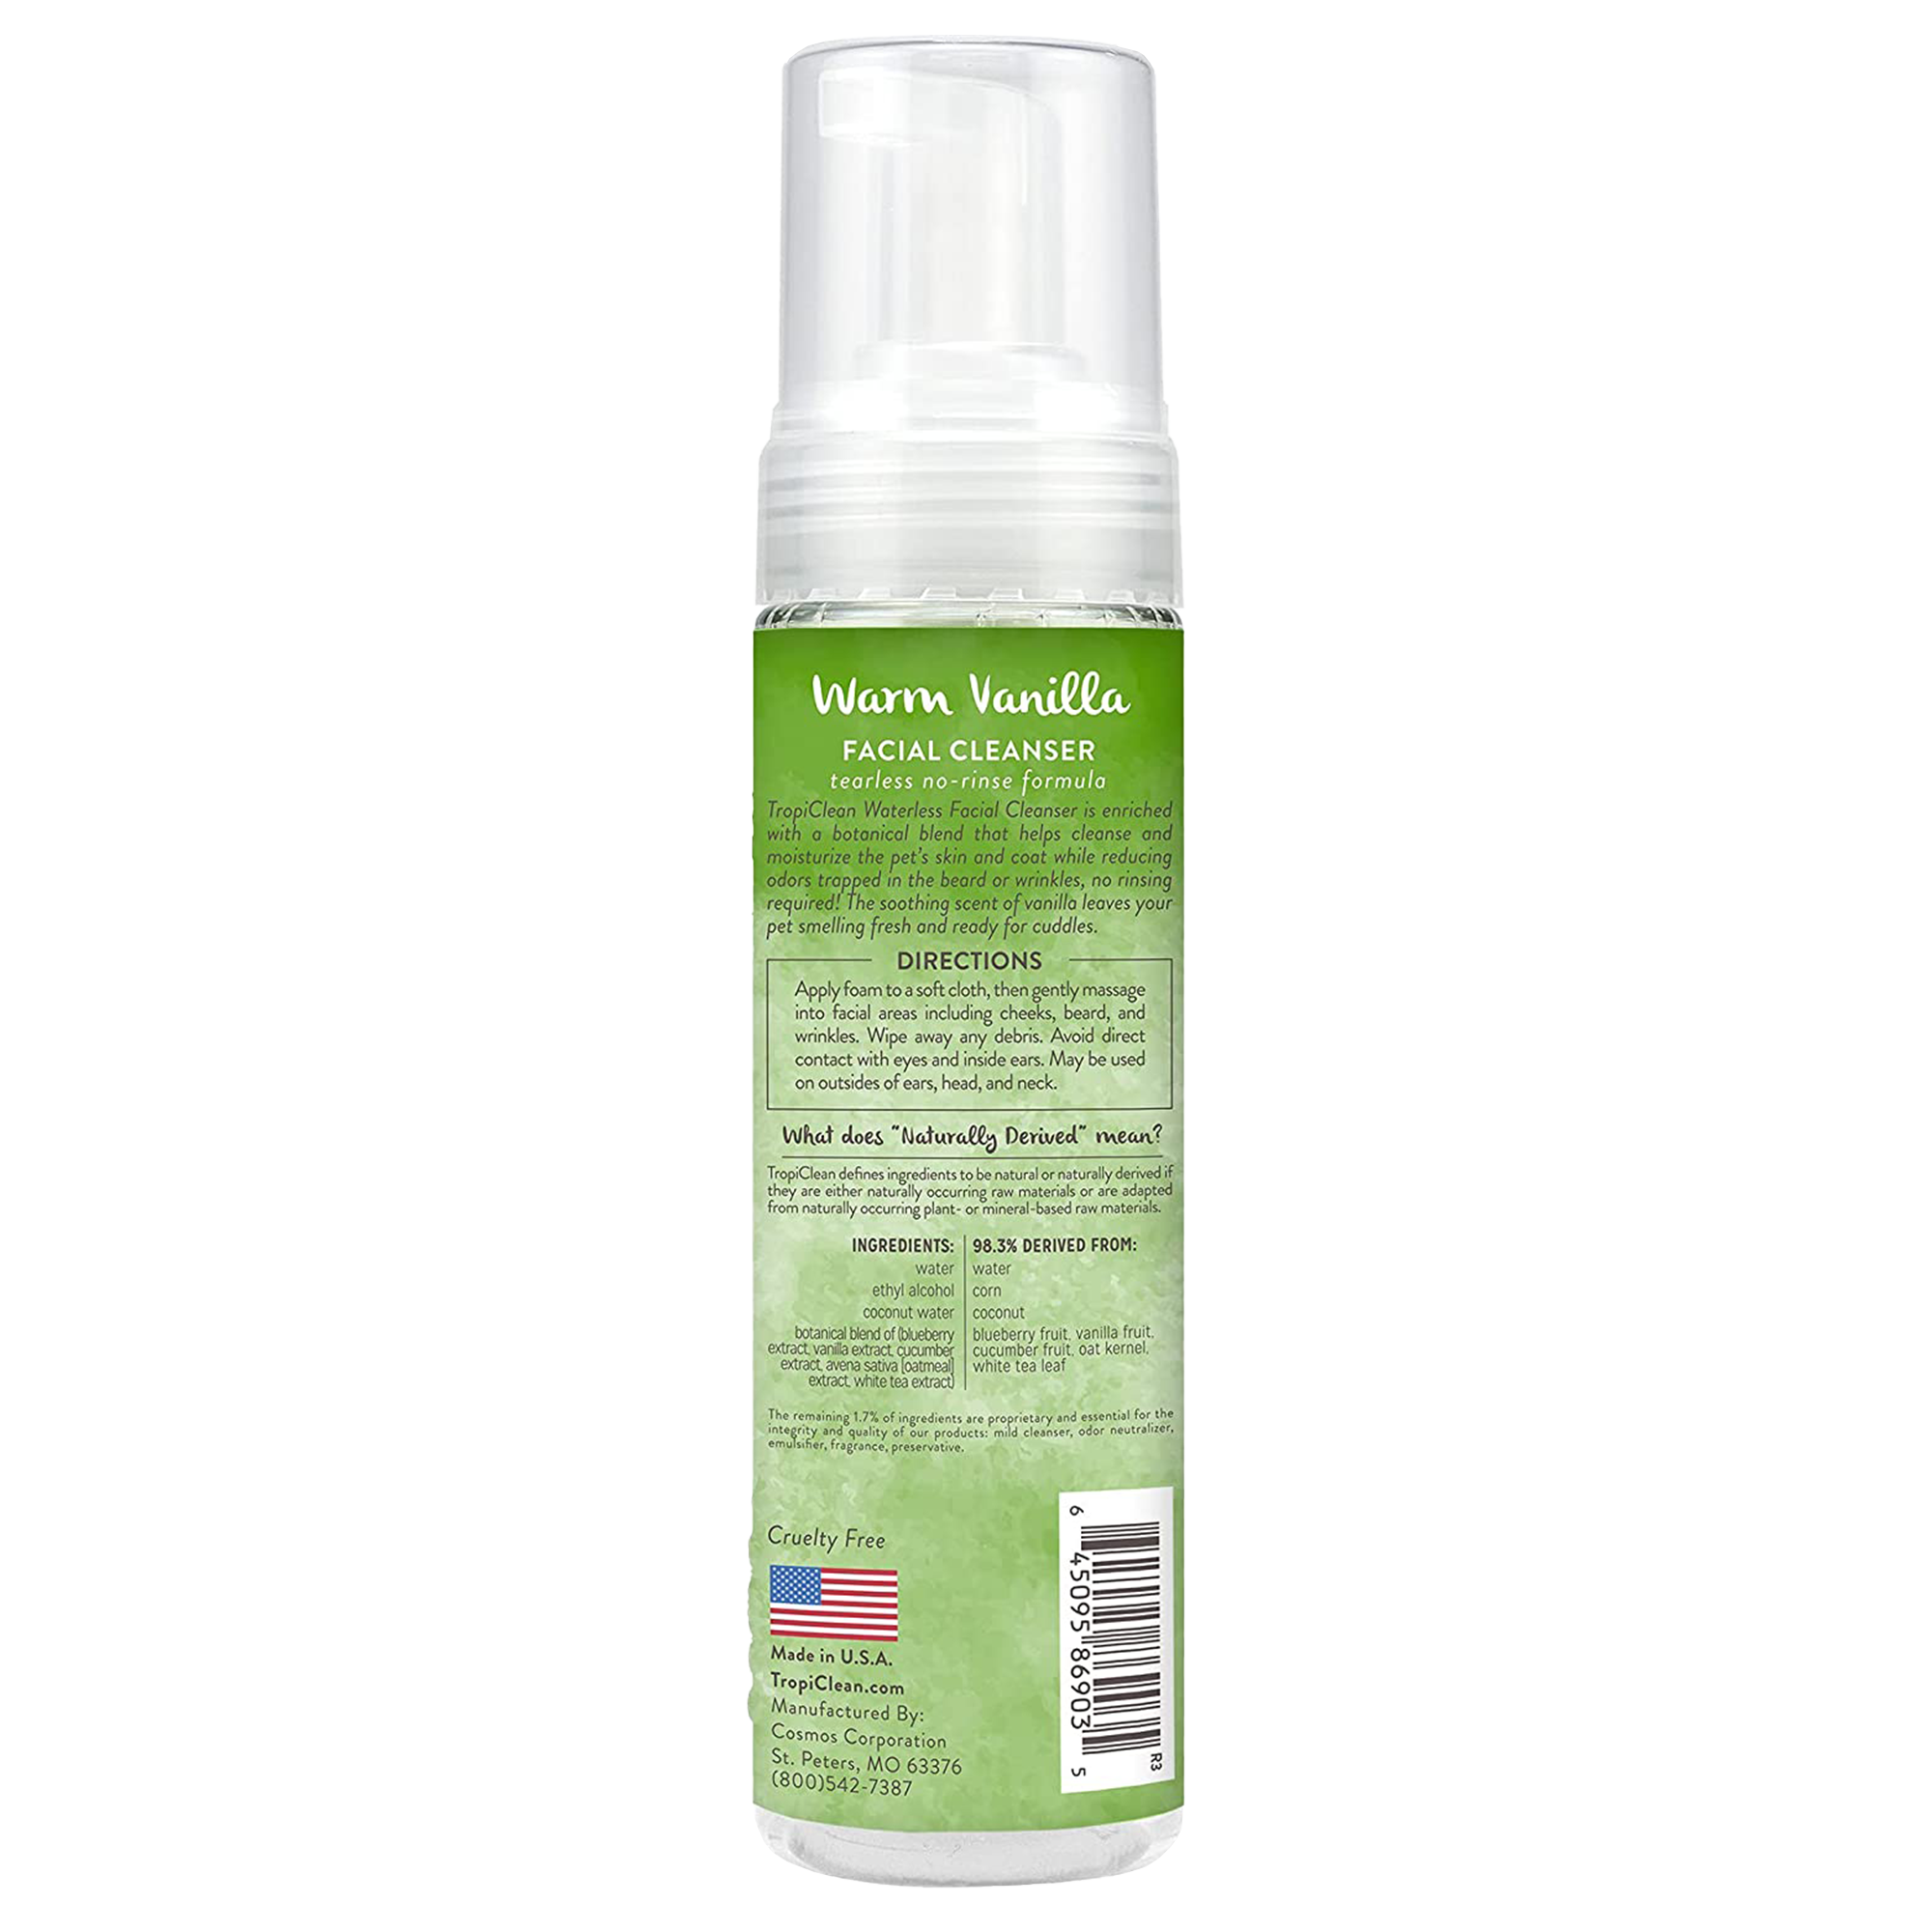 Tropiclean Tearless Facial Cleanser to Remove Stains & Dirt (220ml)